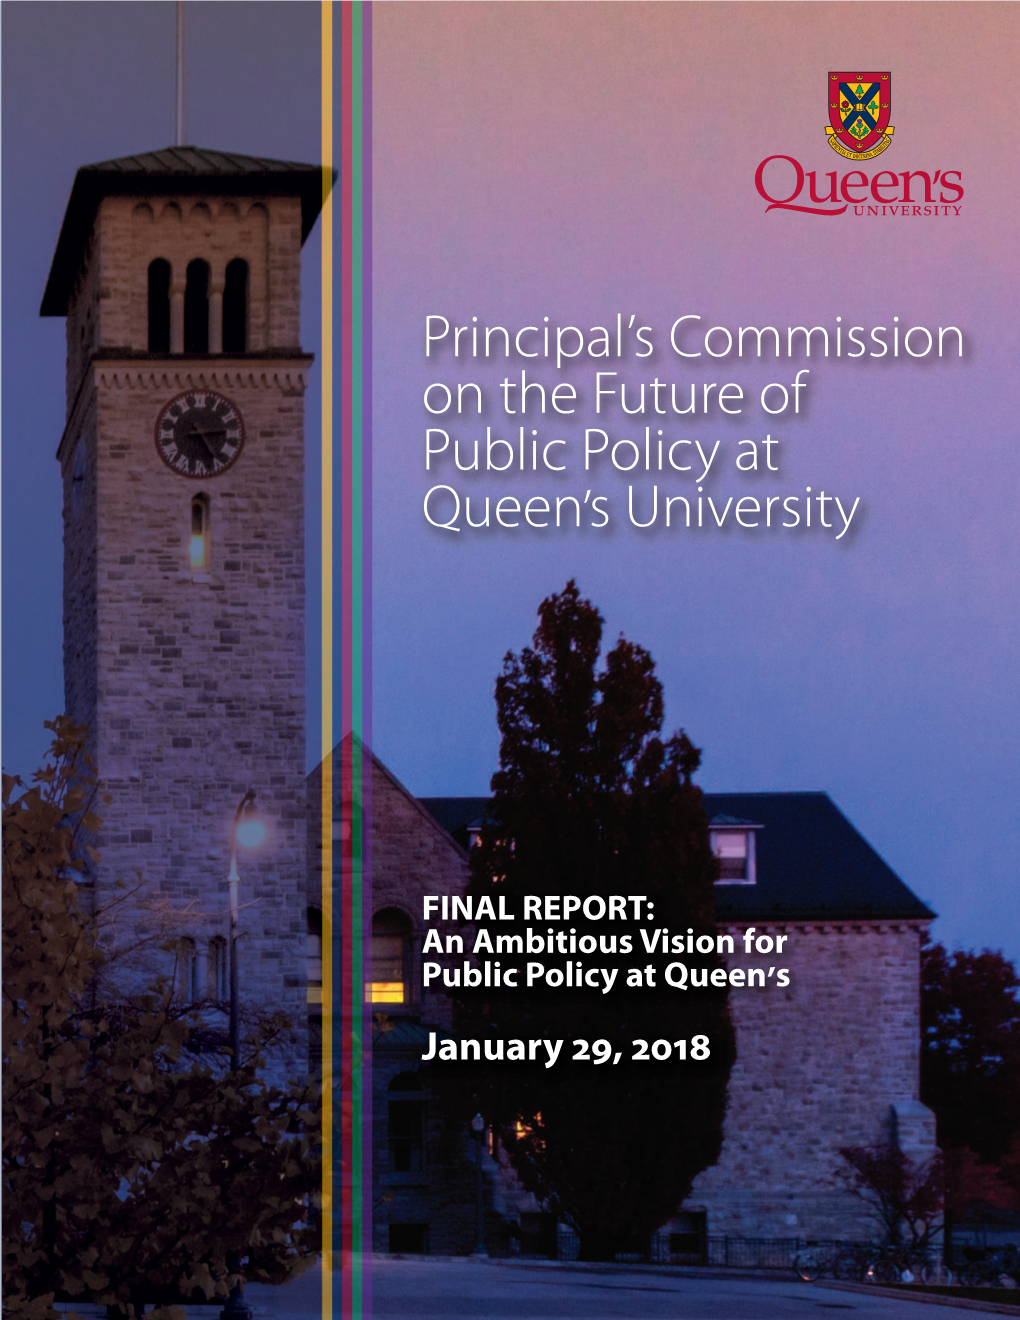 Principal's Commission on the Future of Public Policy at Queen's University